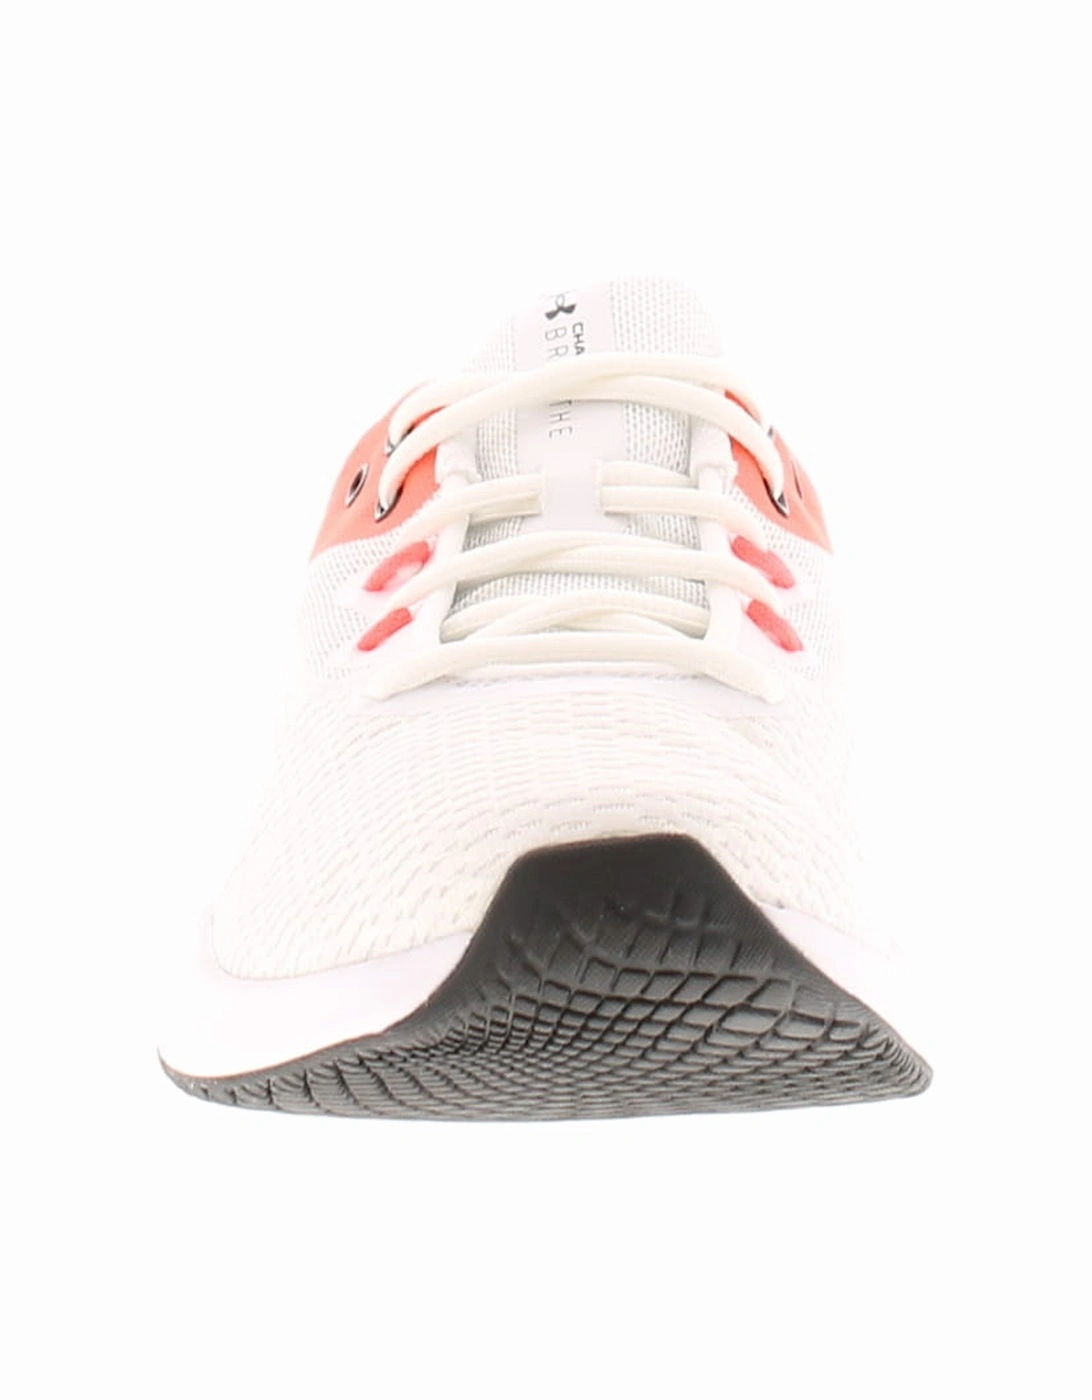 Womens Trainers Charged Breath Lace Up white red UK Size